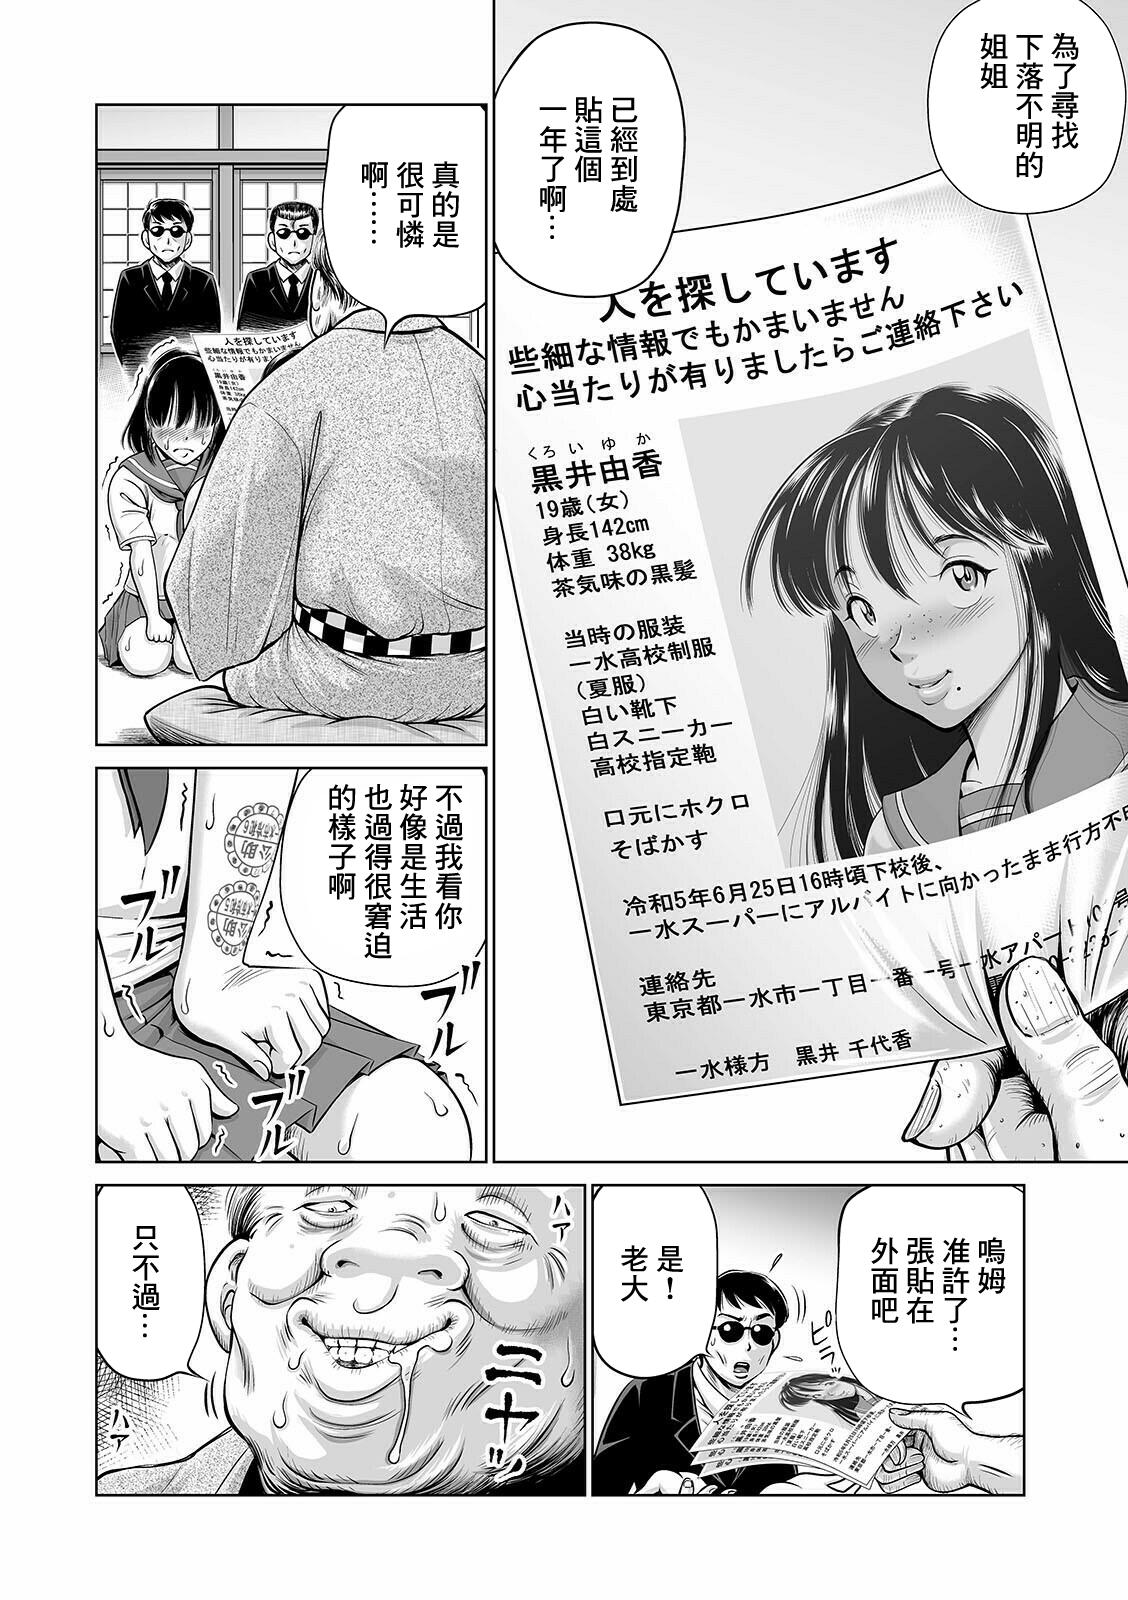 Police 姉をたずねて牝墜屋敷 Female Orgasm - Page 2